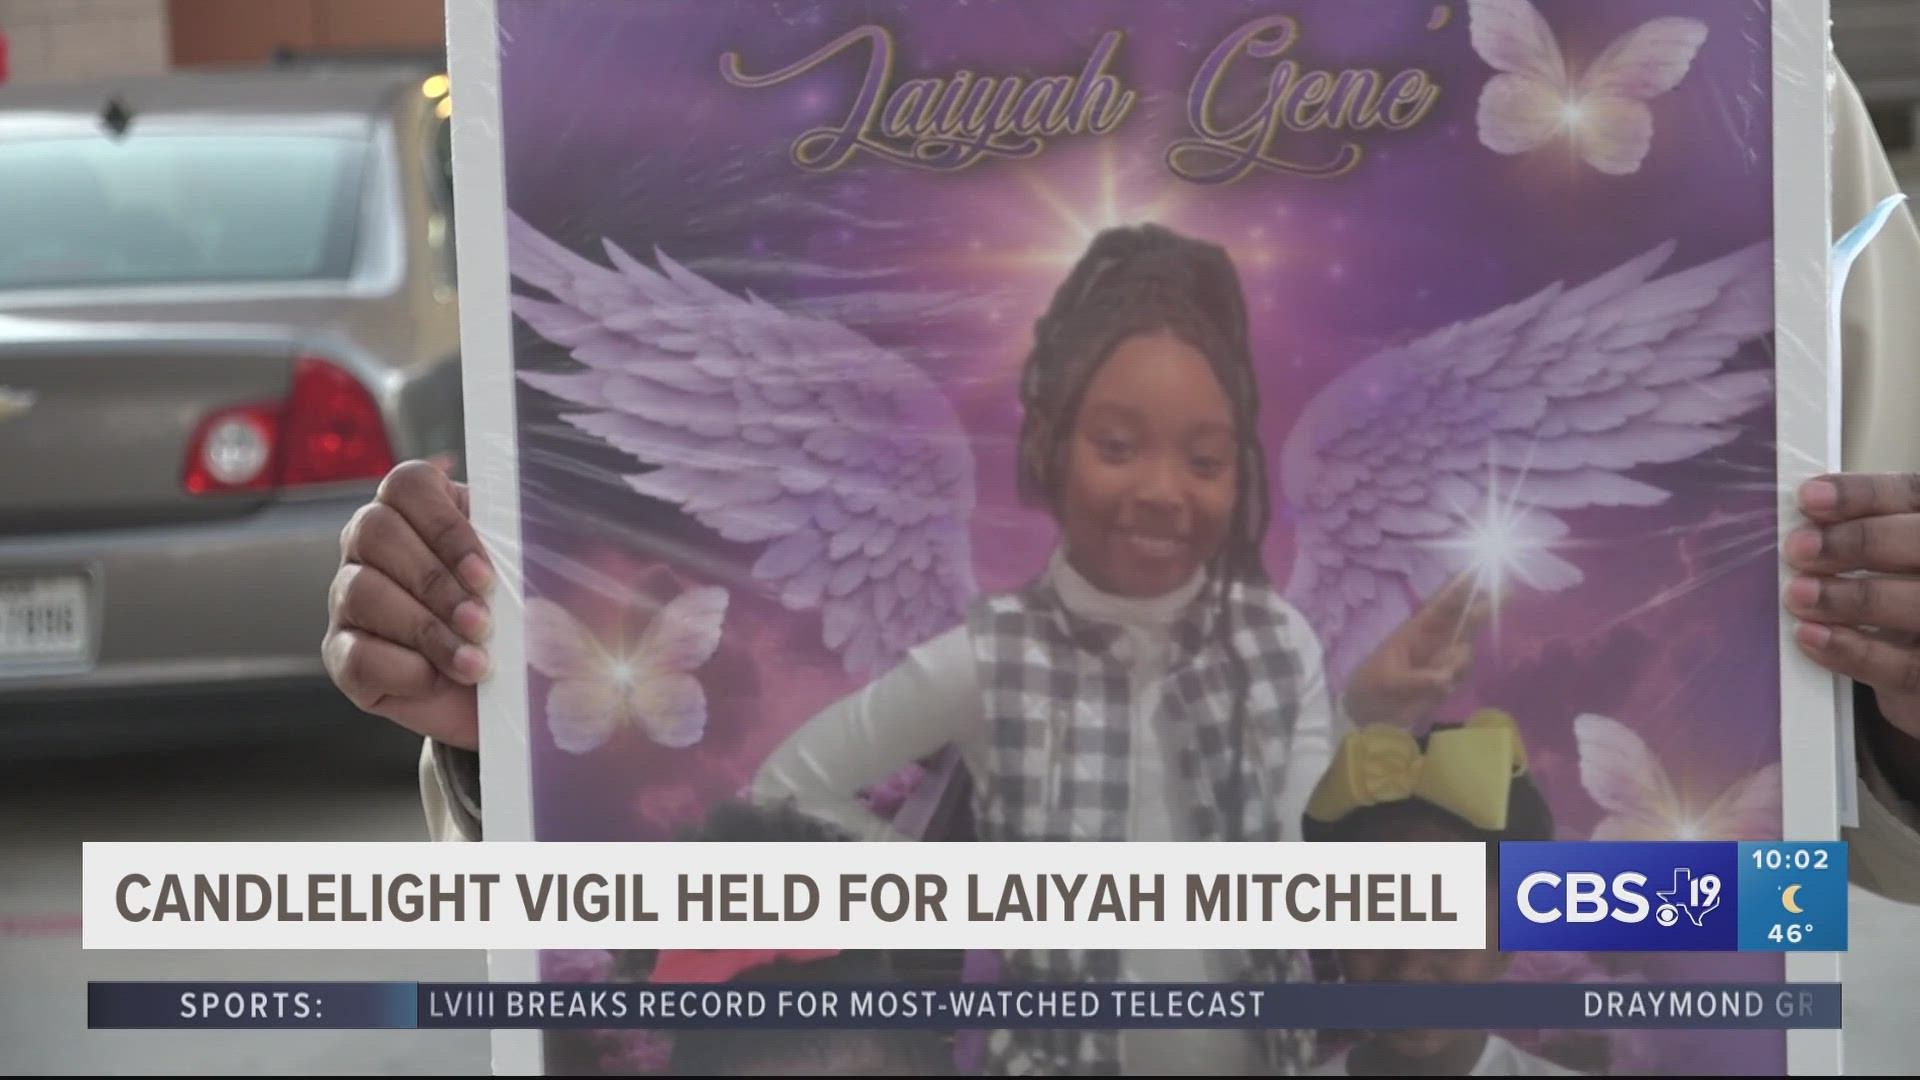 Laiyah Gene Mitchell, 7, was killed in a wreck on State Highway 64 West on Feb. 4.